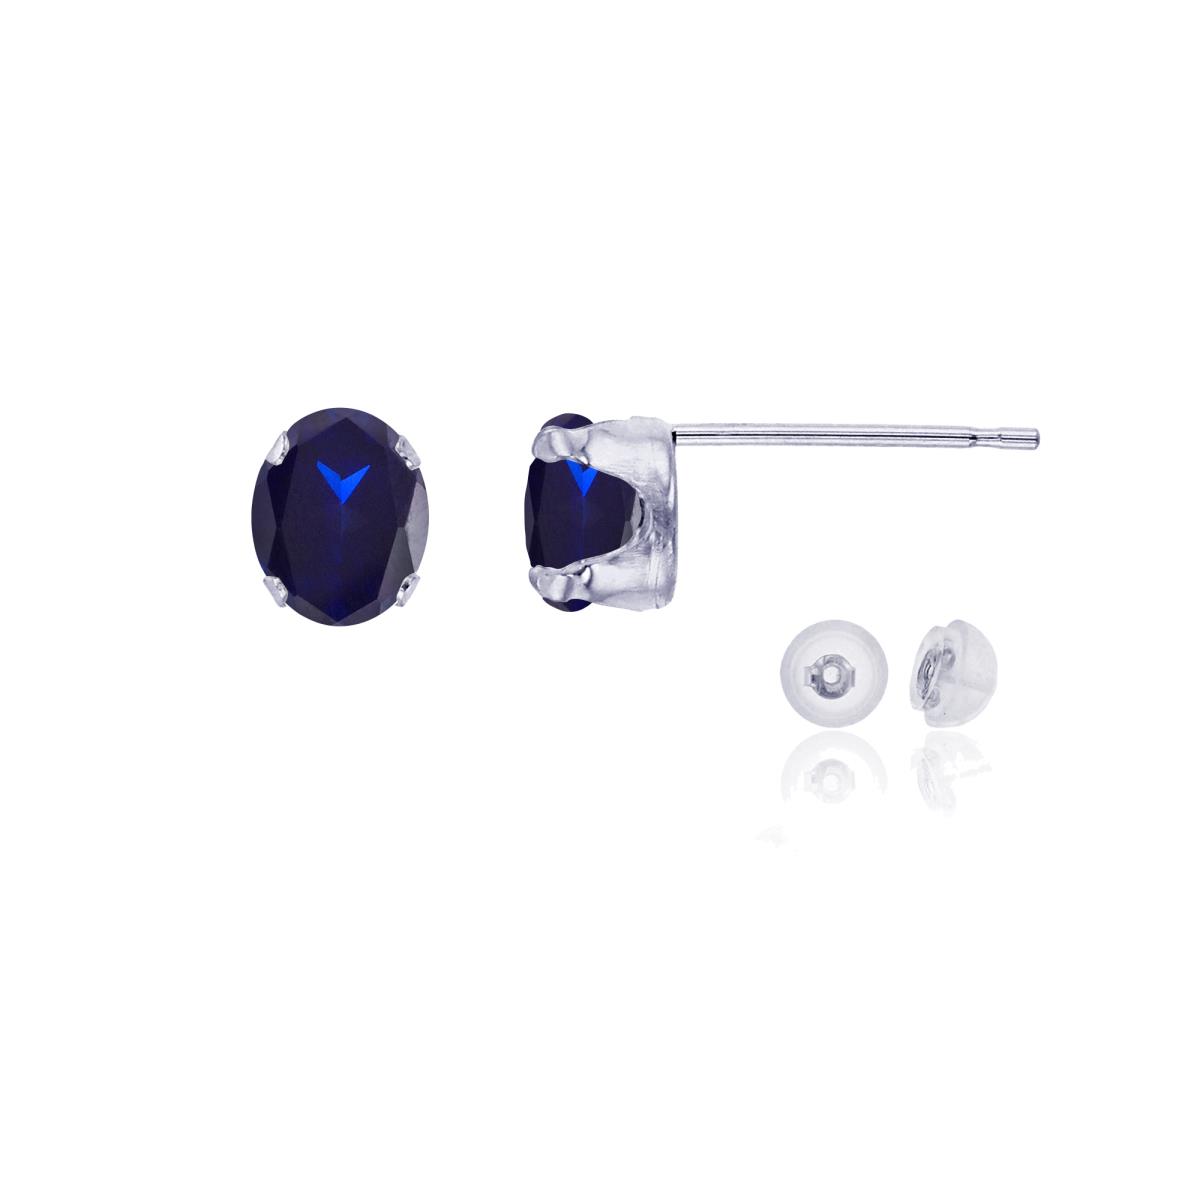 10K White Gold 6x4mm Oval Cr Blue Sapphire Stud Earring with Silicone Back